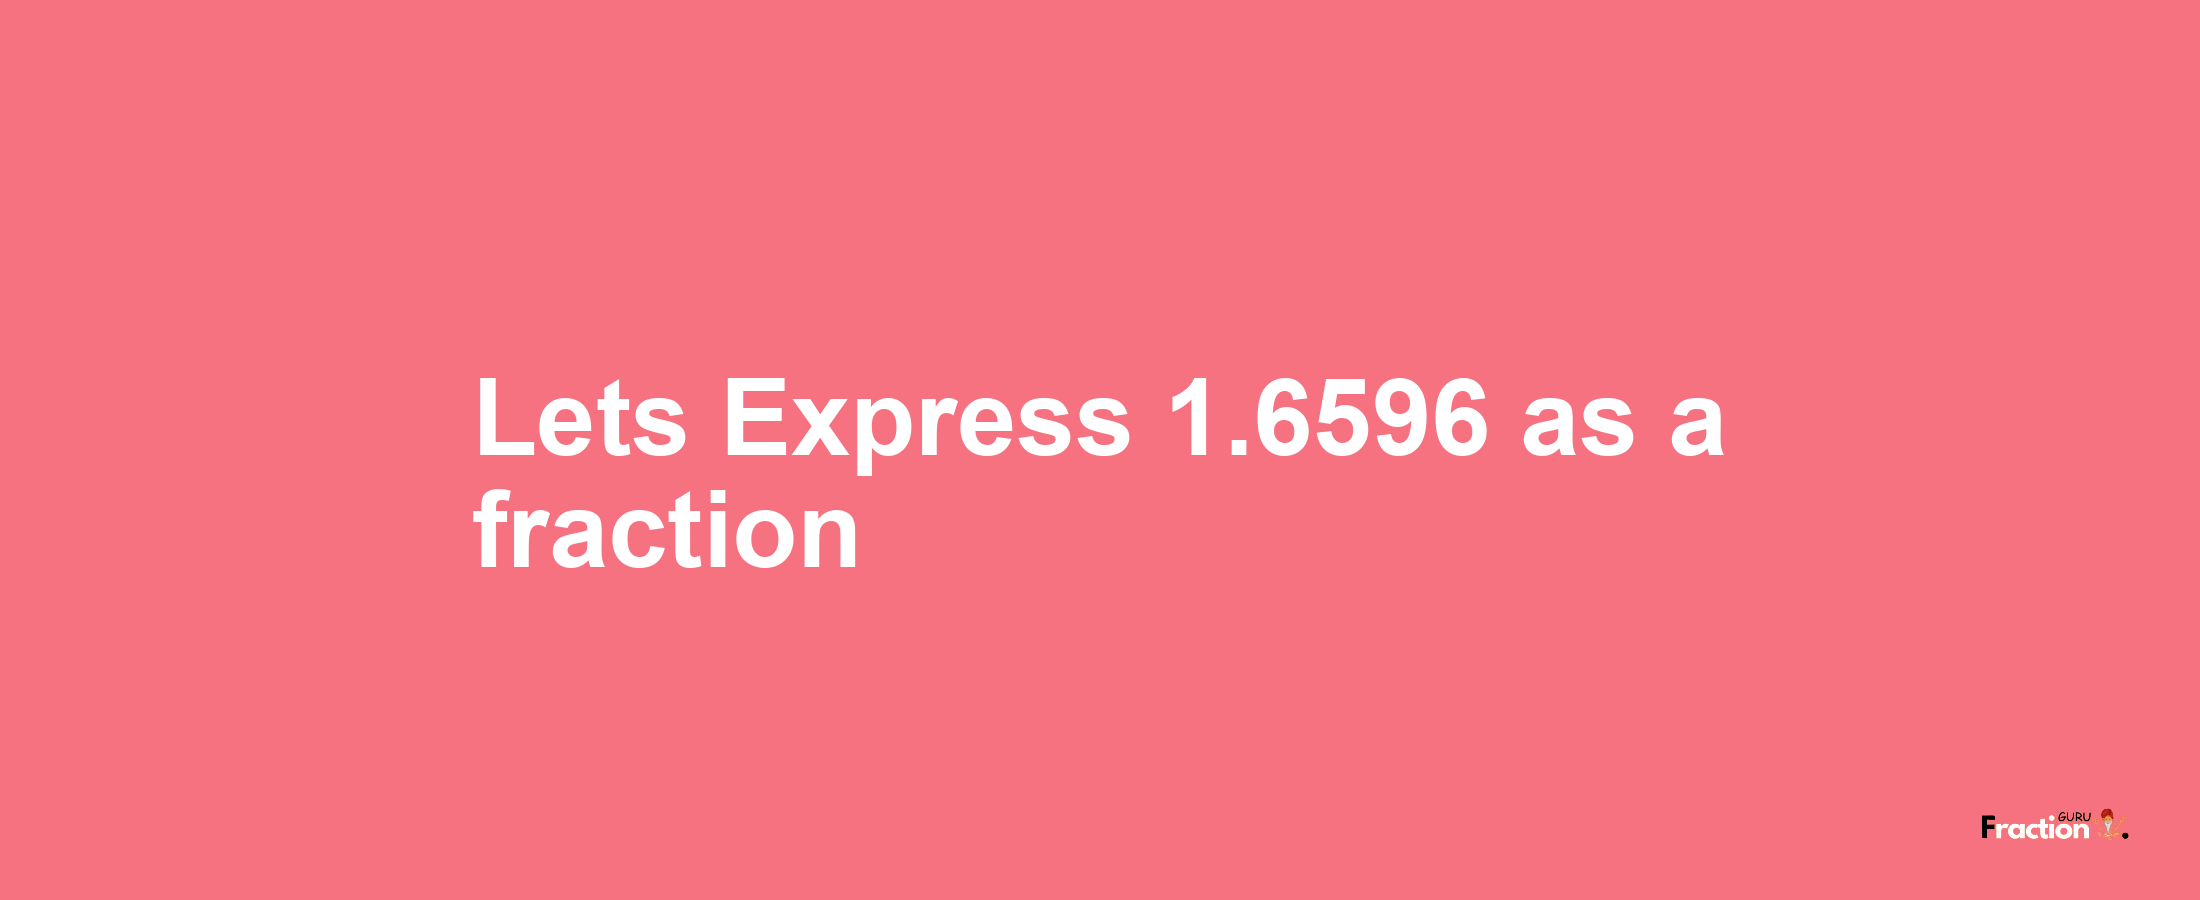 Lets Express 1.6596 as afraction